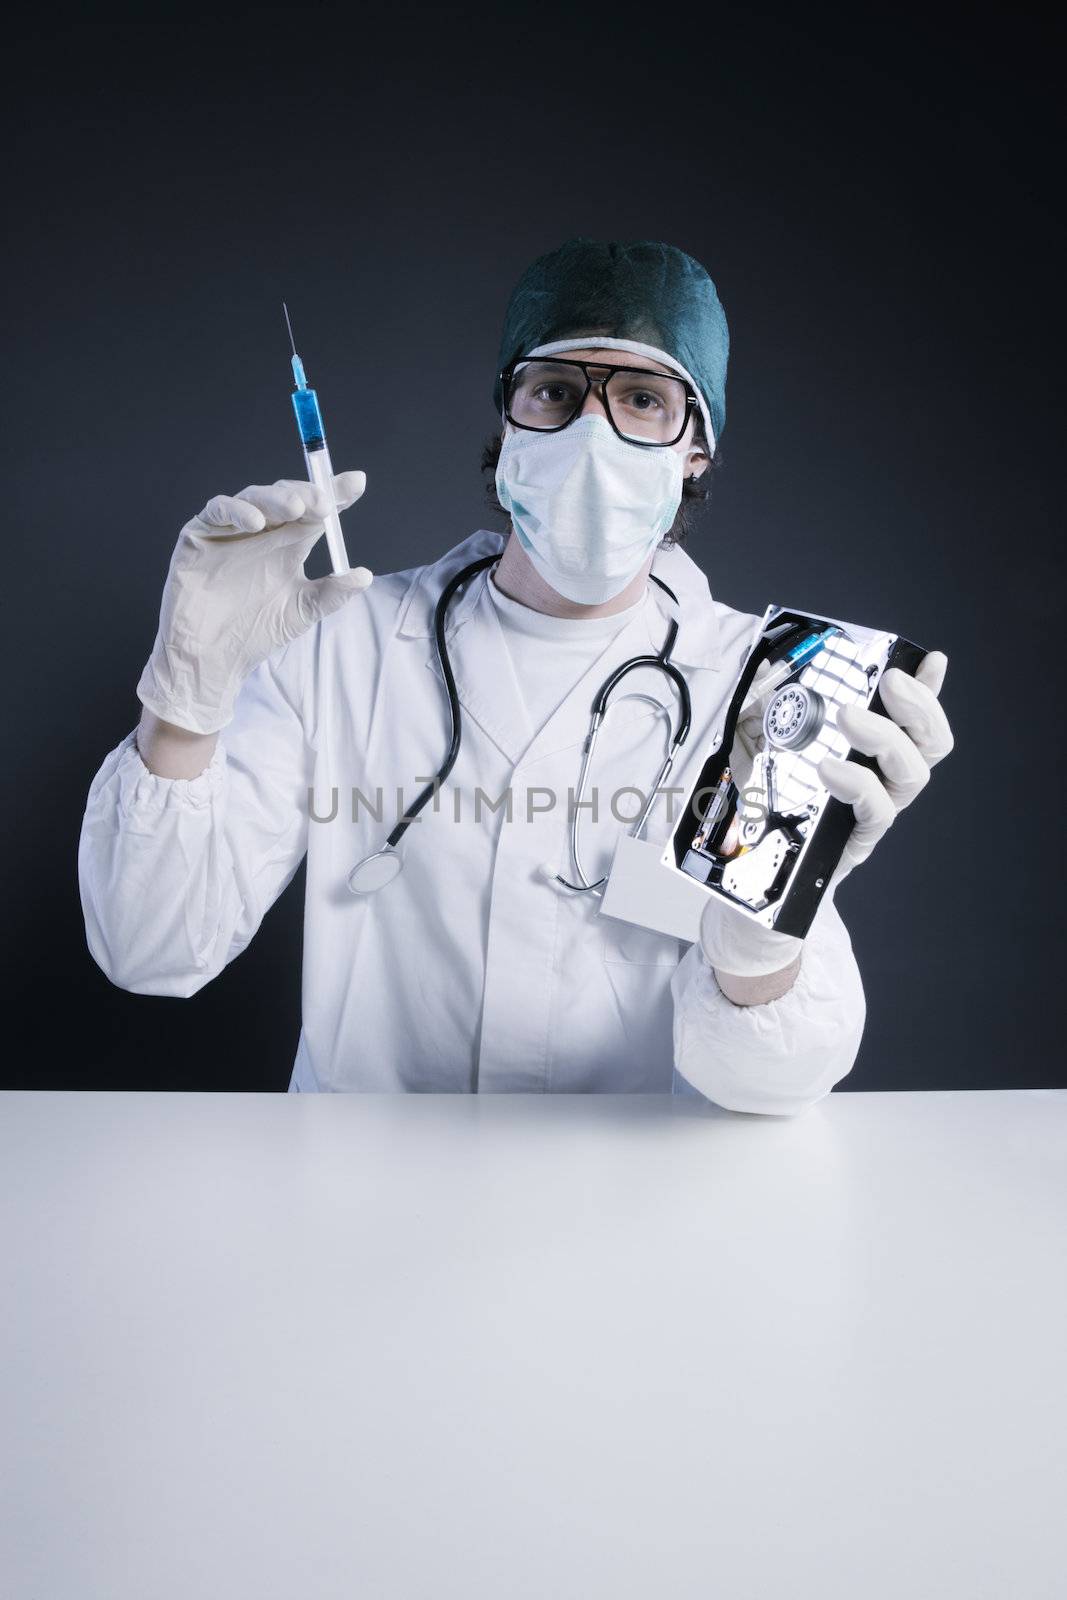 Computer virus concept. Technical / Doctor with syringe and hard disk